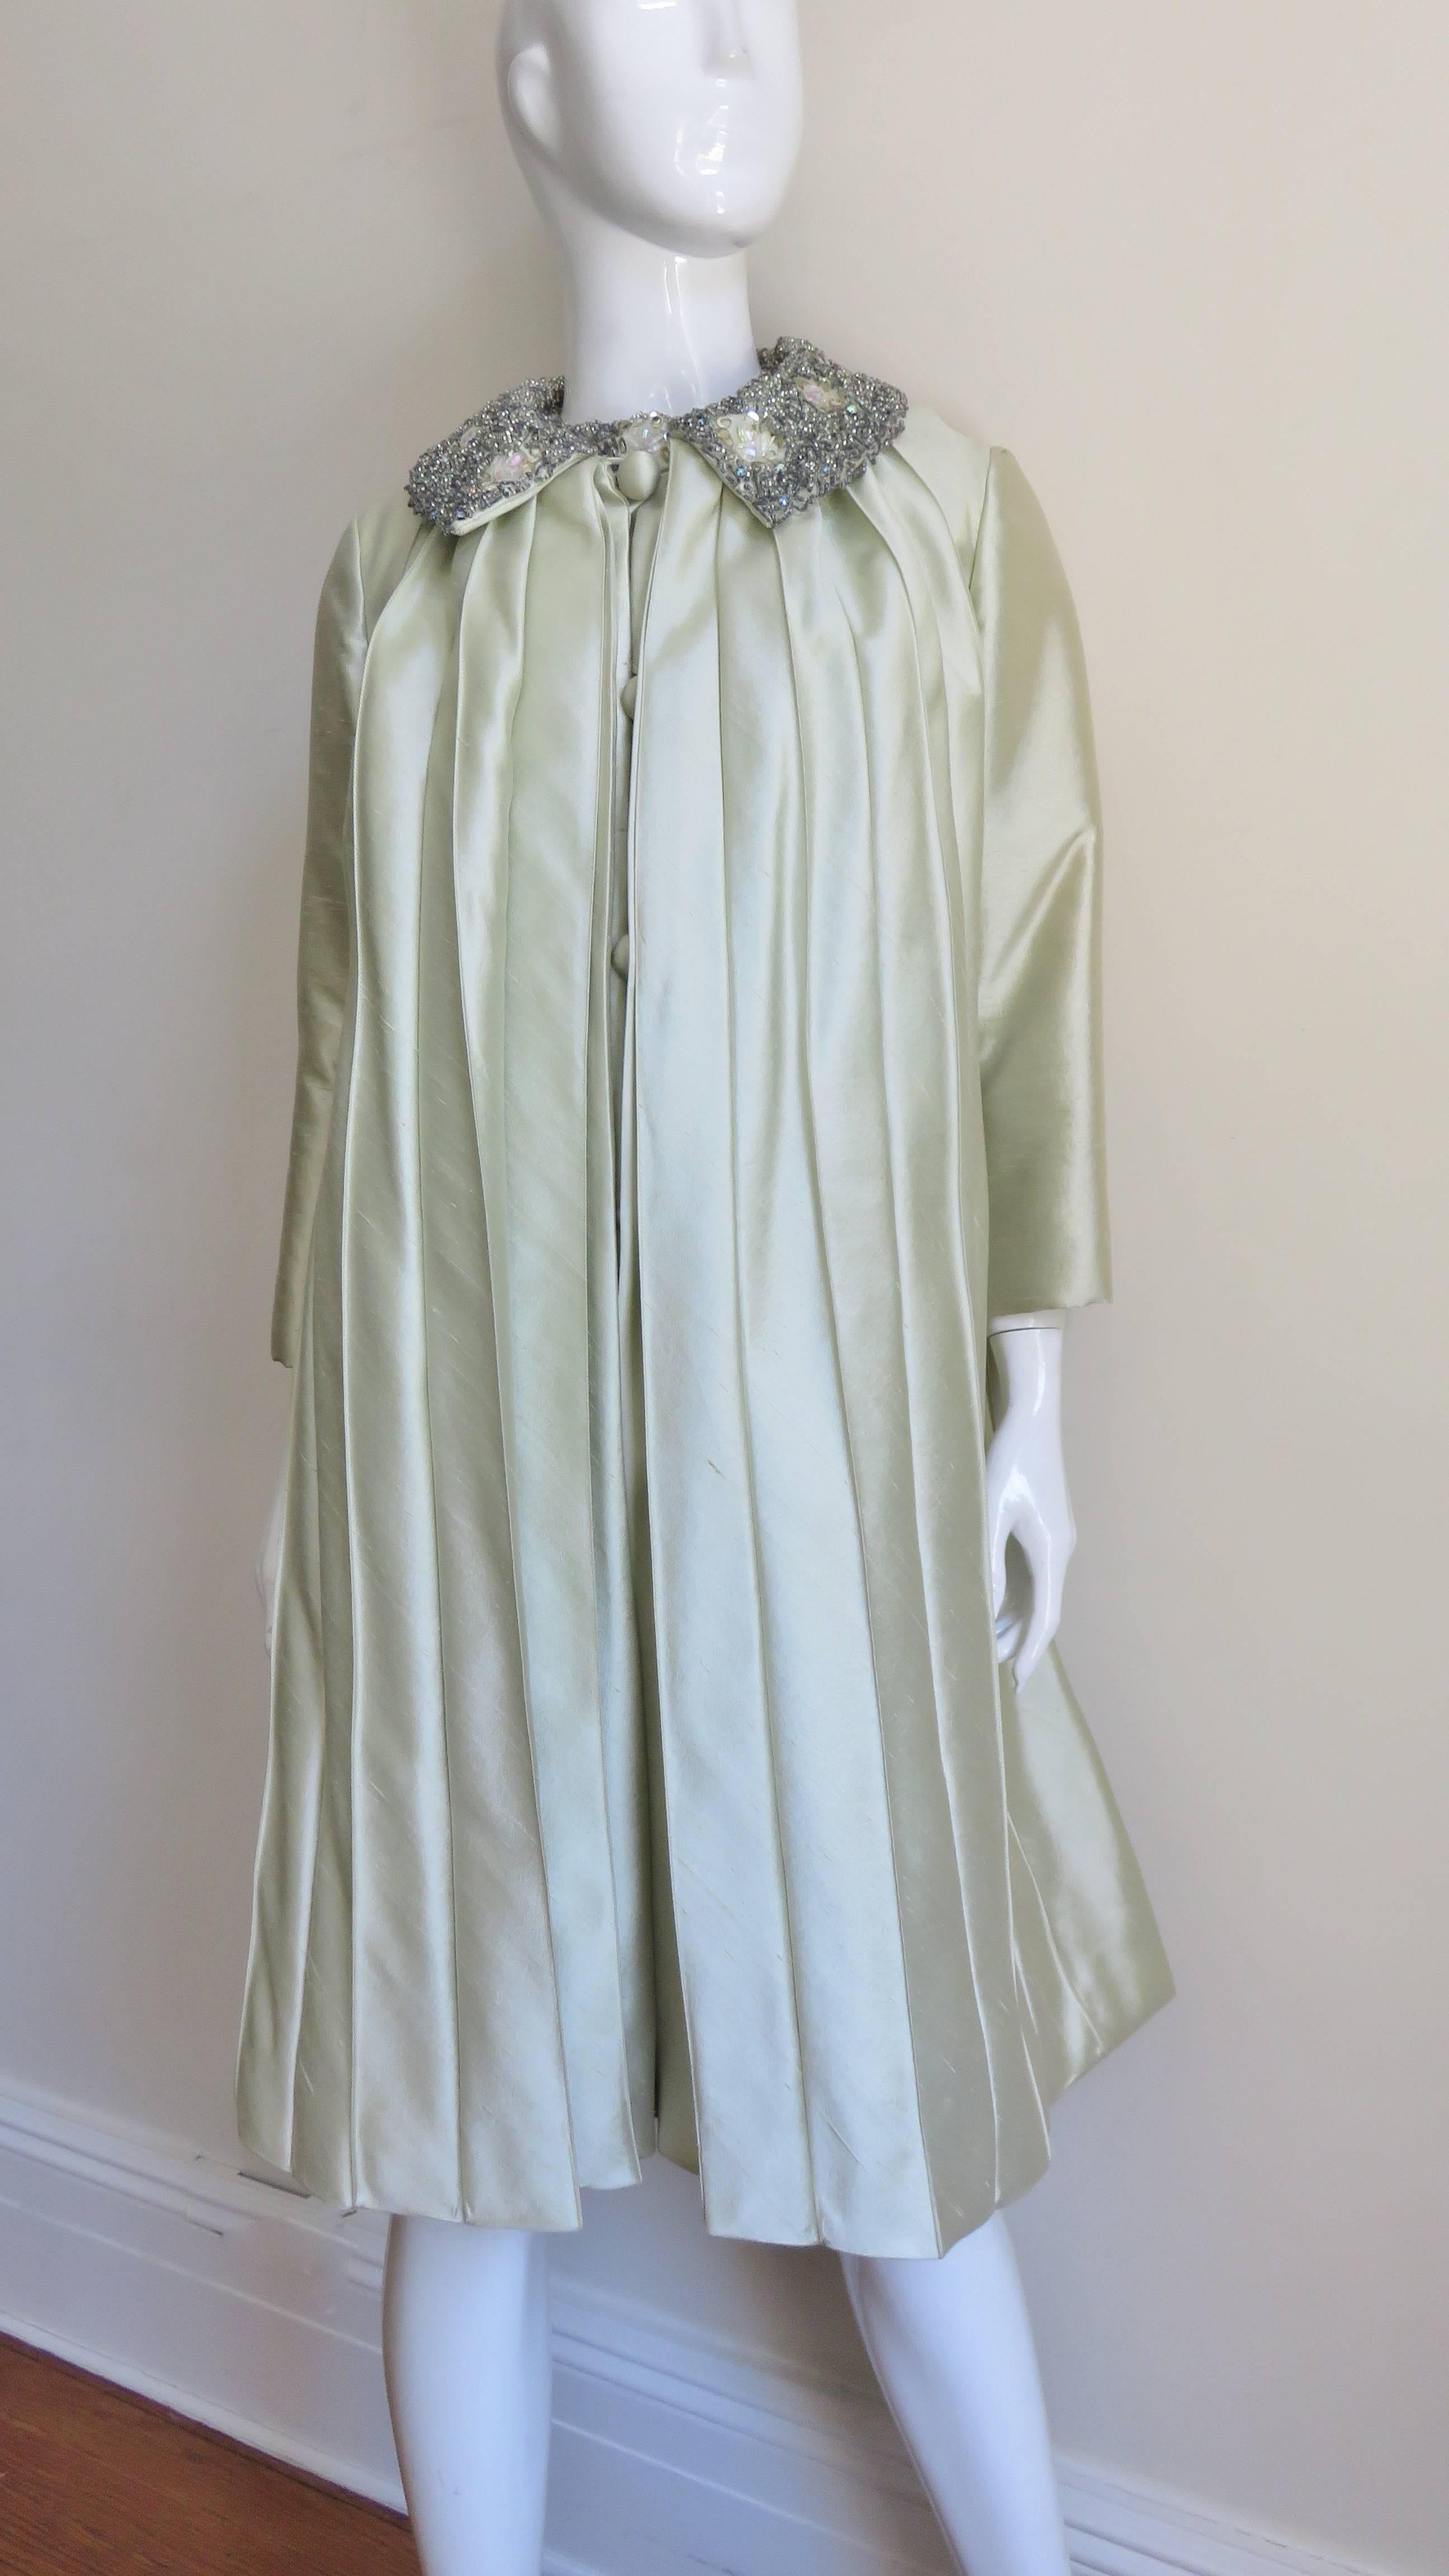 This is a beautiful mint green silk 2 piece dress and coat set. The sleeveless dress is baby doll style with soft folds eminating from the neckline then flaring gently to the hemline.  A 2